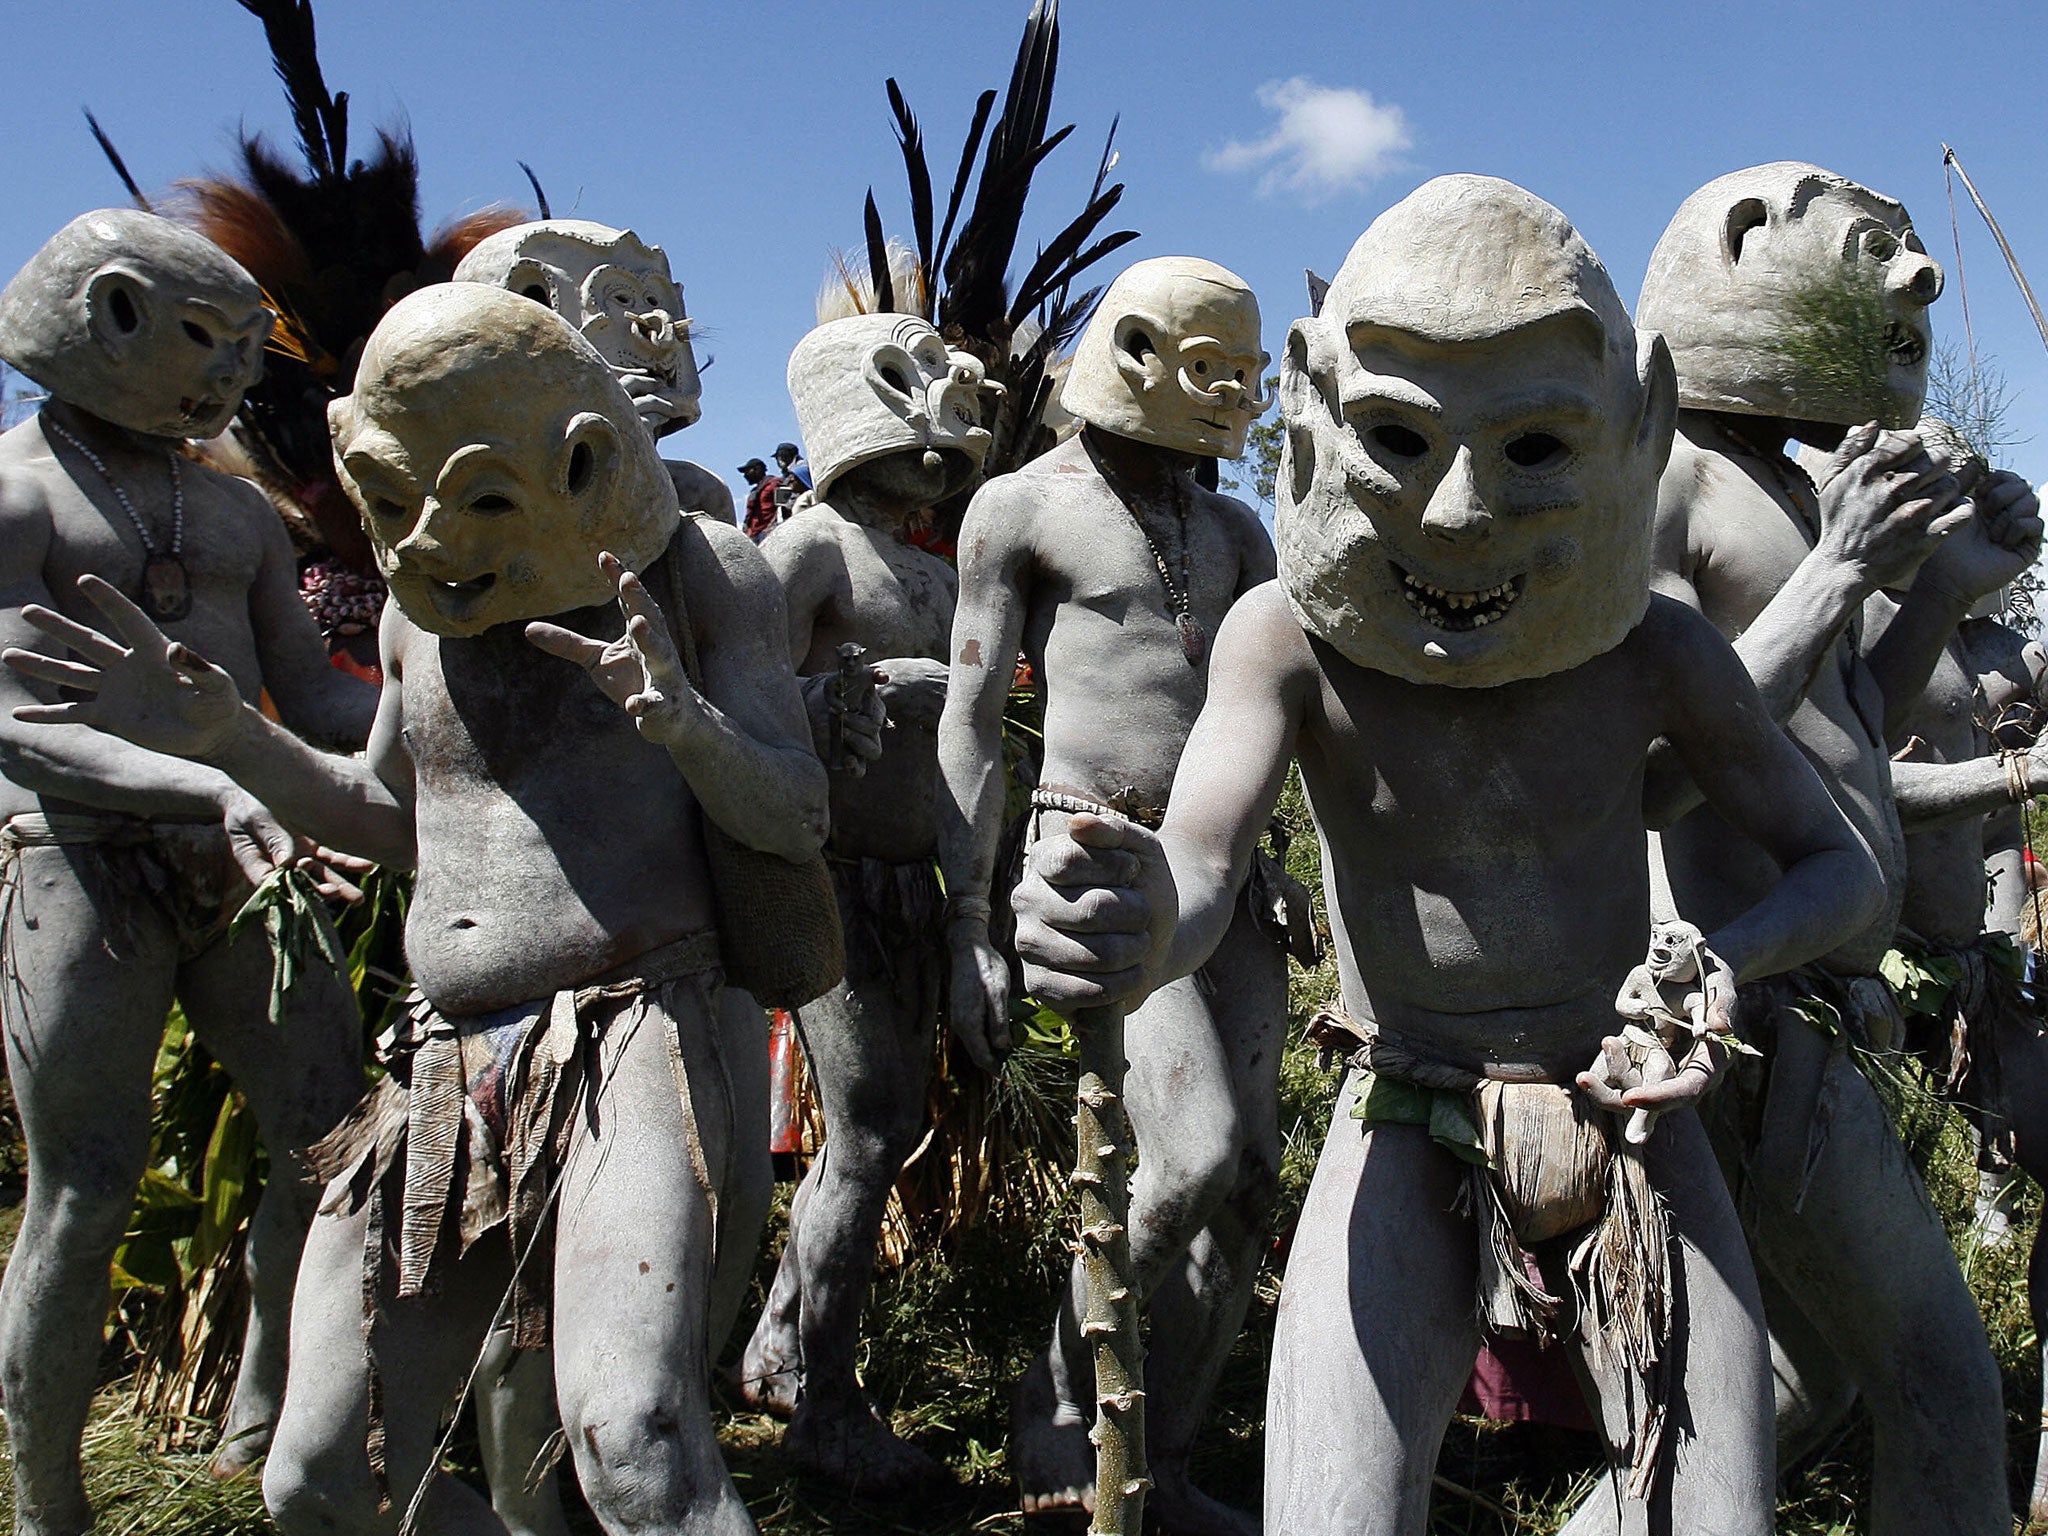 Papua New Guinea, though predominantly Christian, retains a strong undercurrent of tribal religion